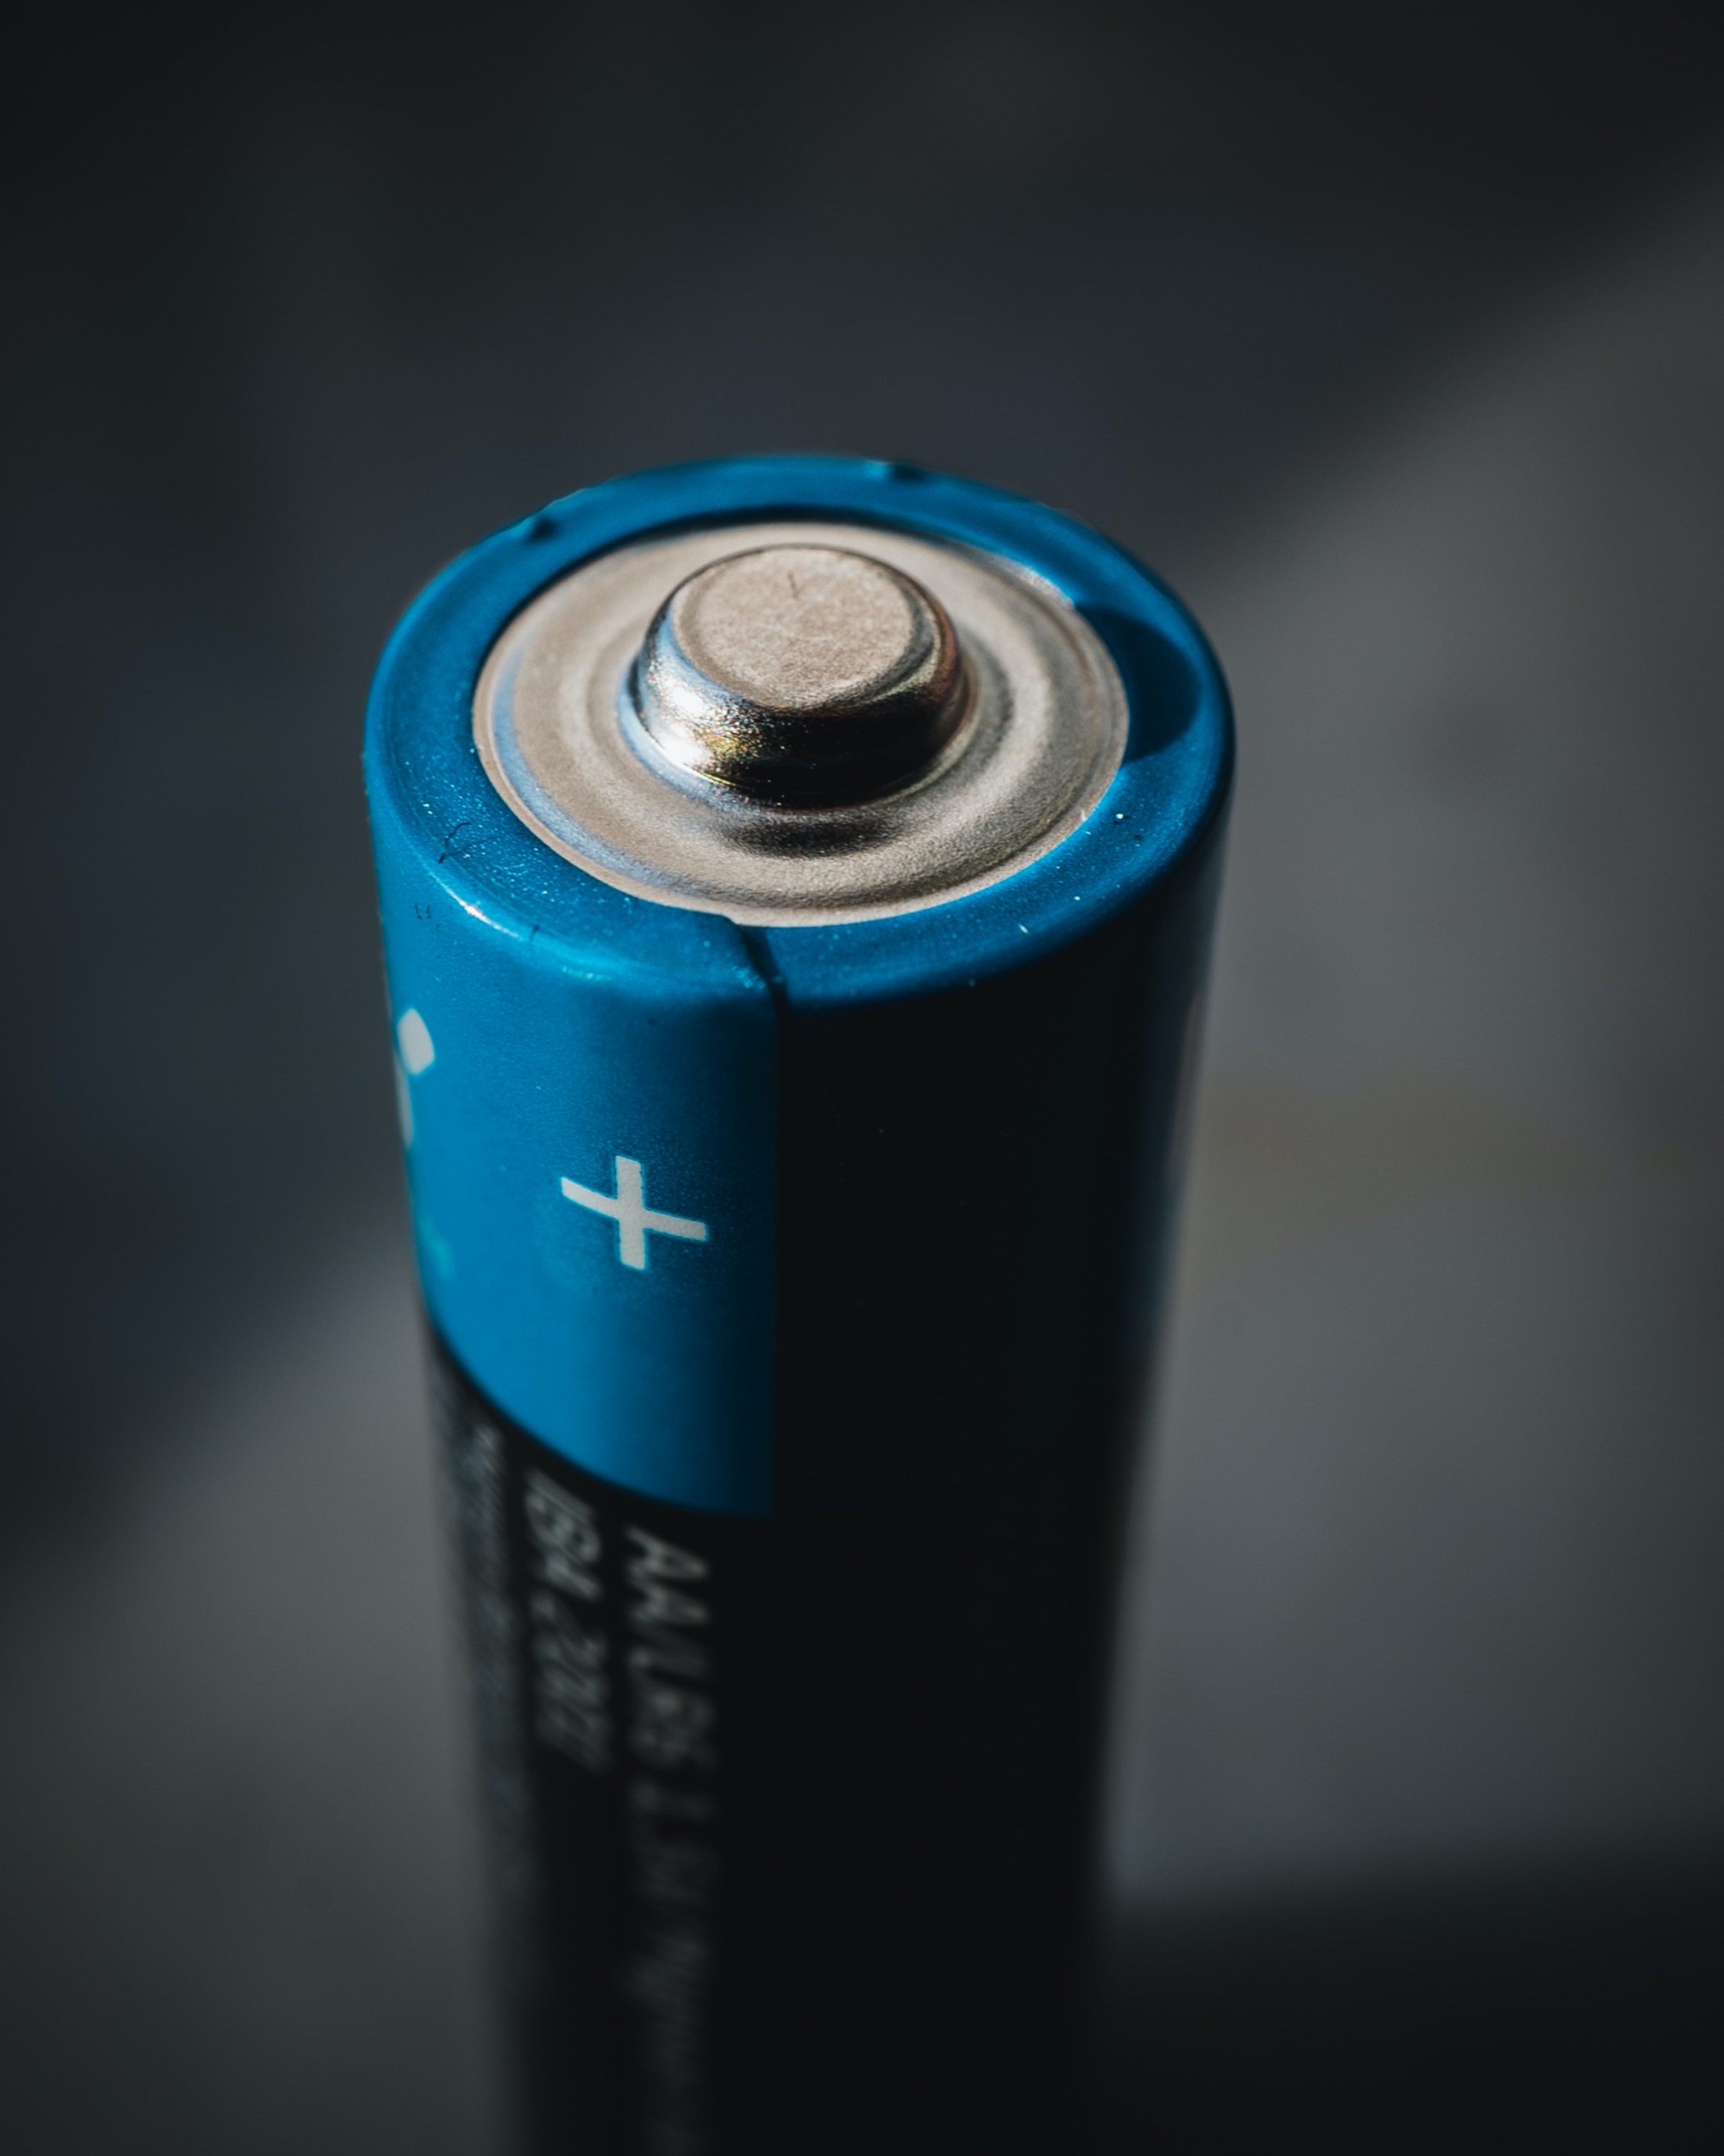 batteries that can hold their charge for days